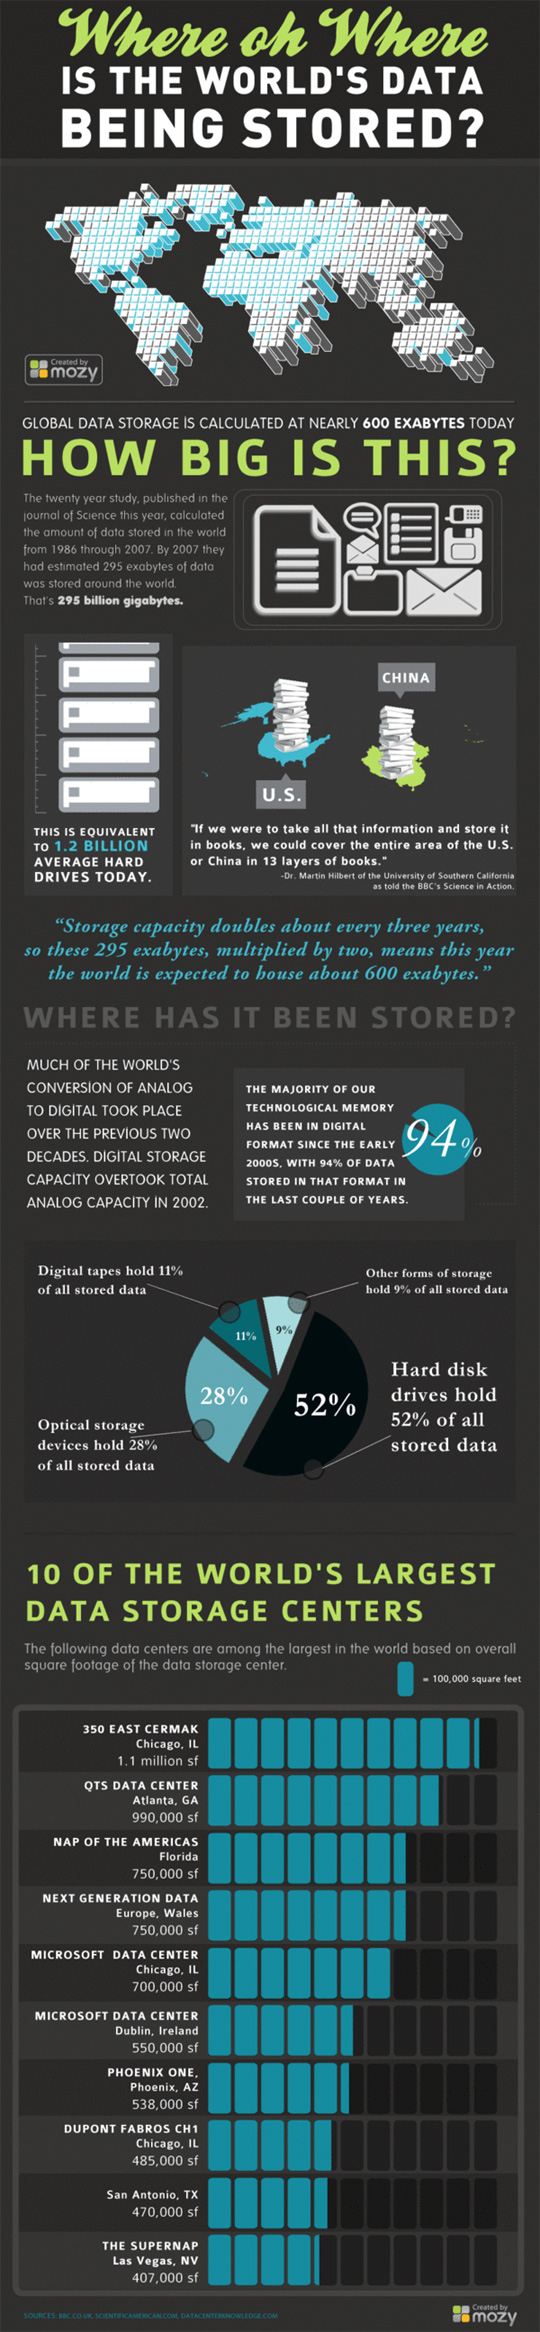 Where Oh Where: Current State Of World's Data Storage (Infographic) 4